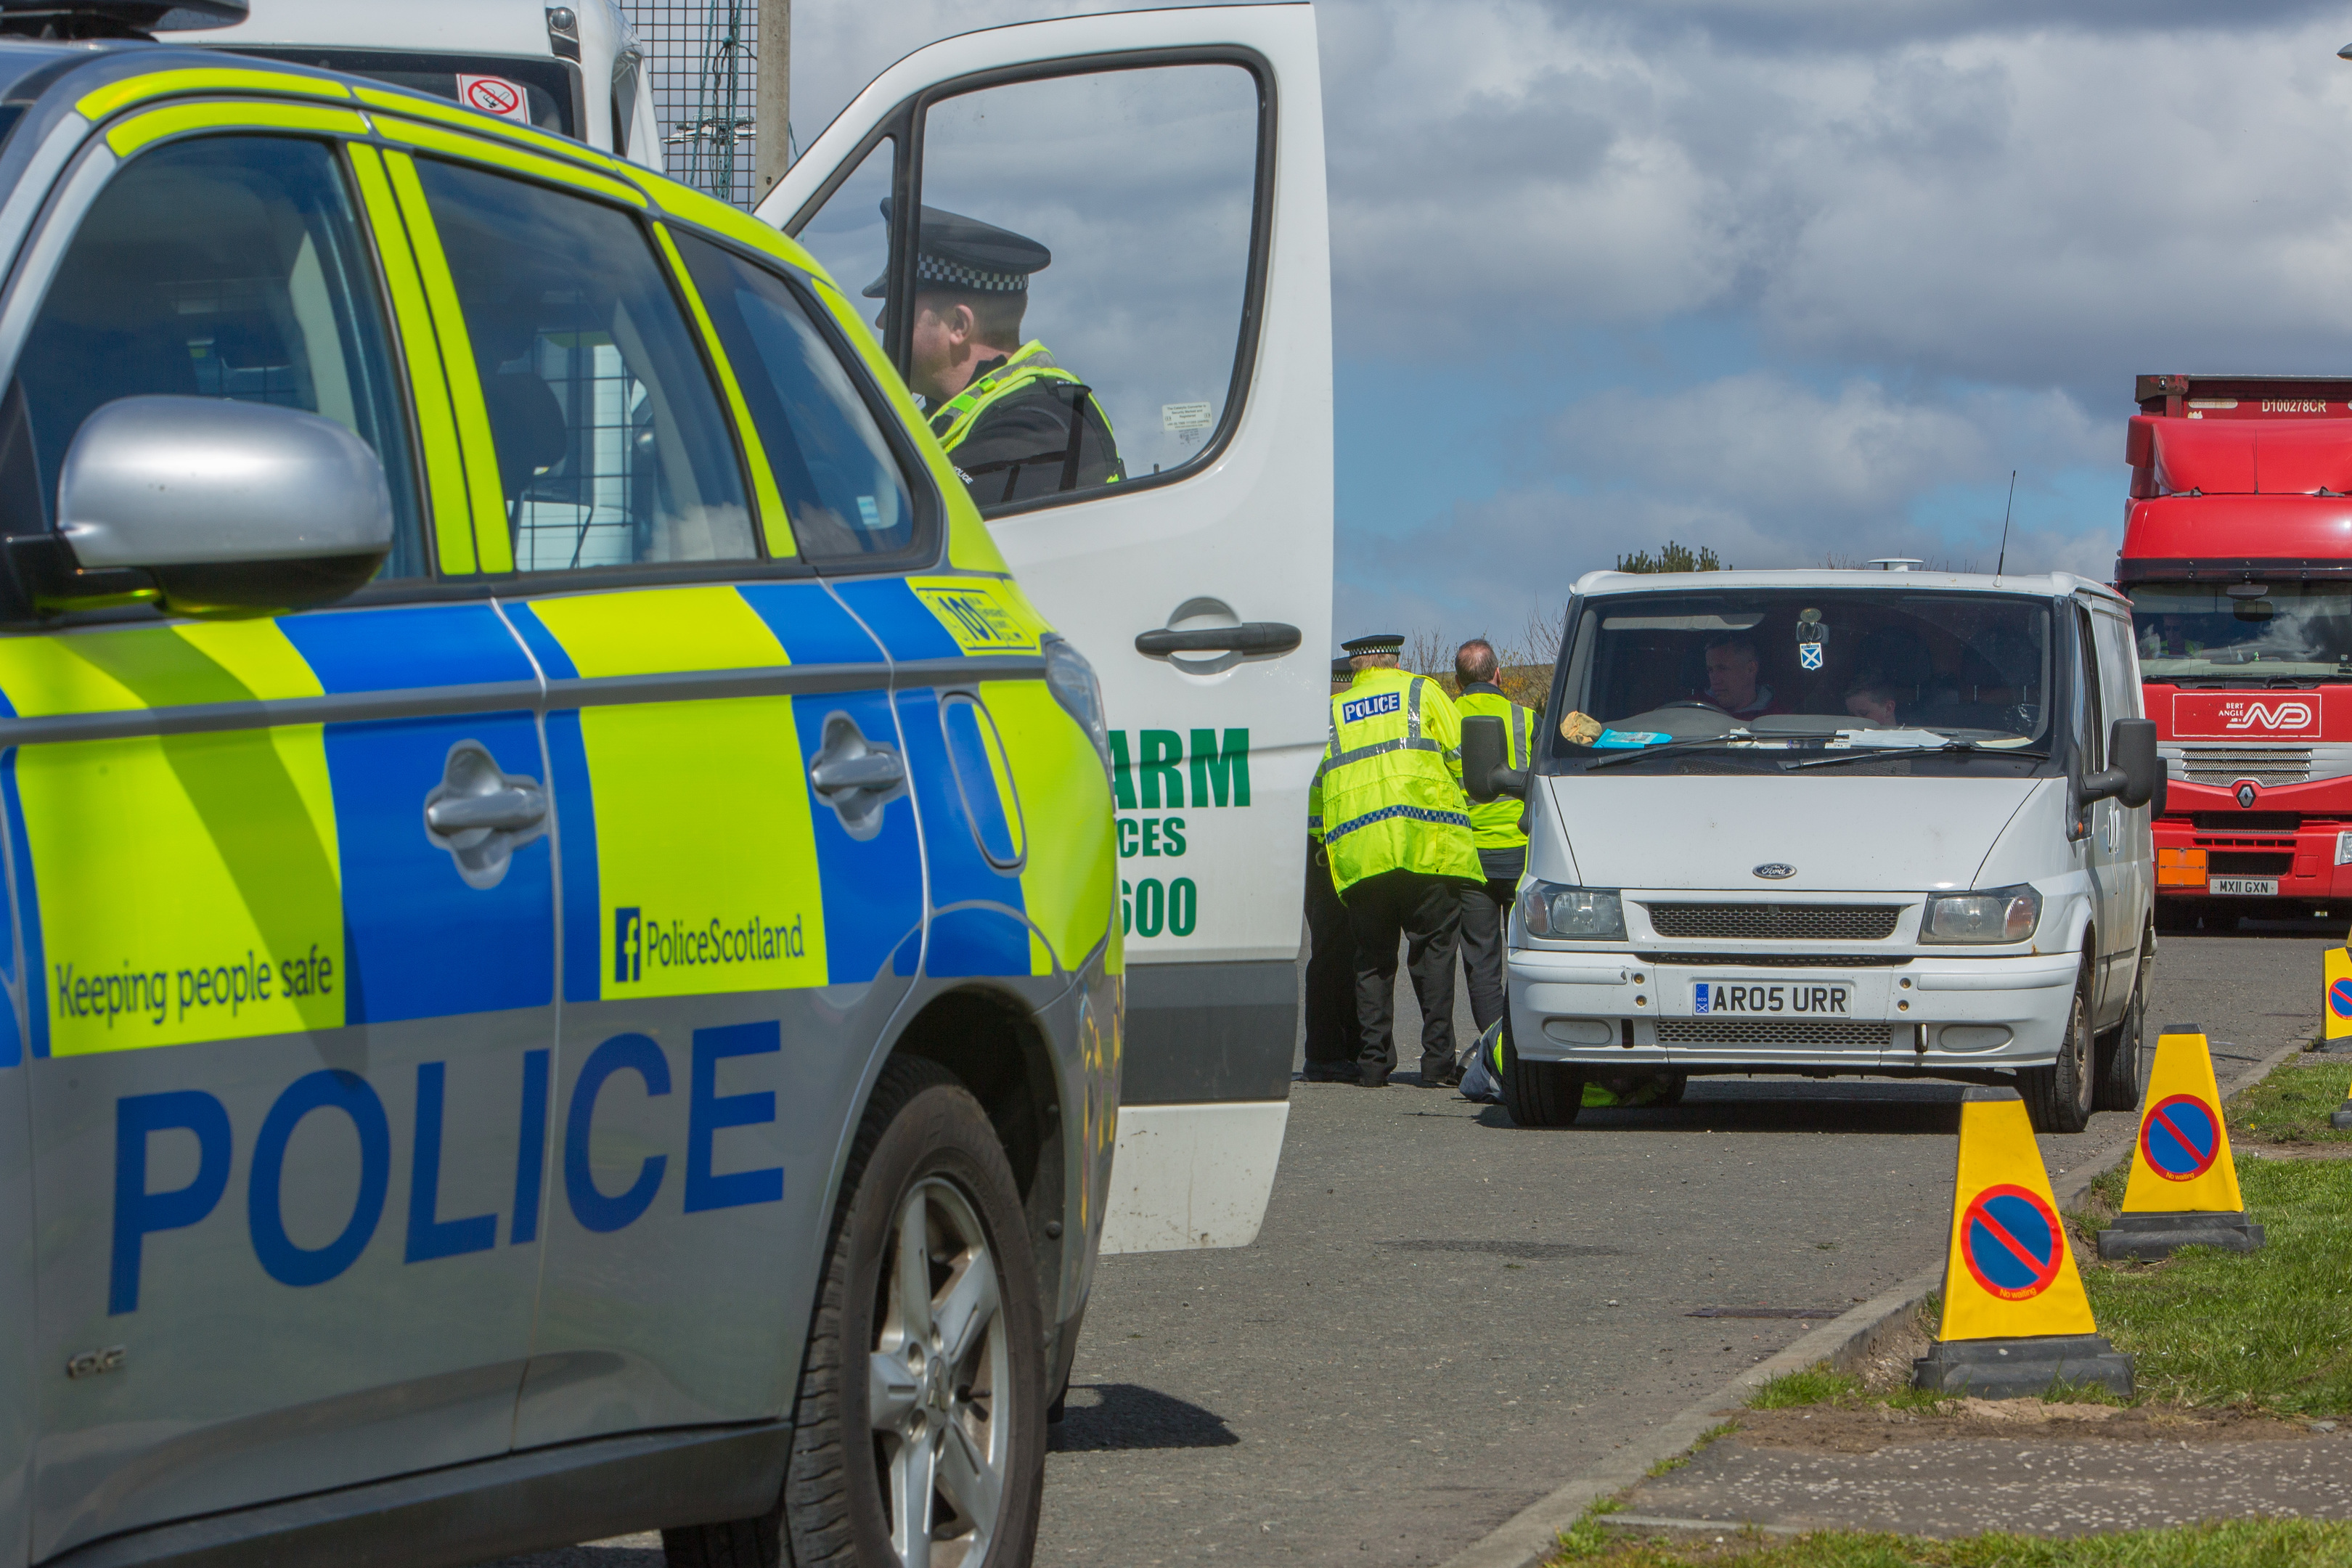 Over 70 drivers were stopped during Operation Merado in Fife.